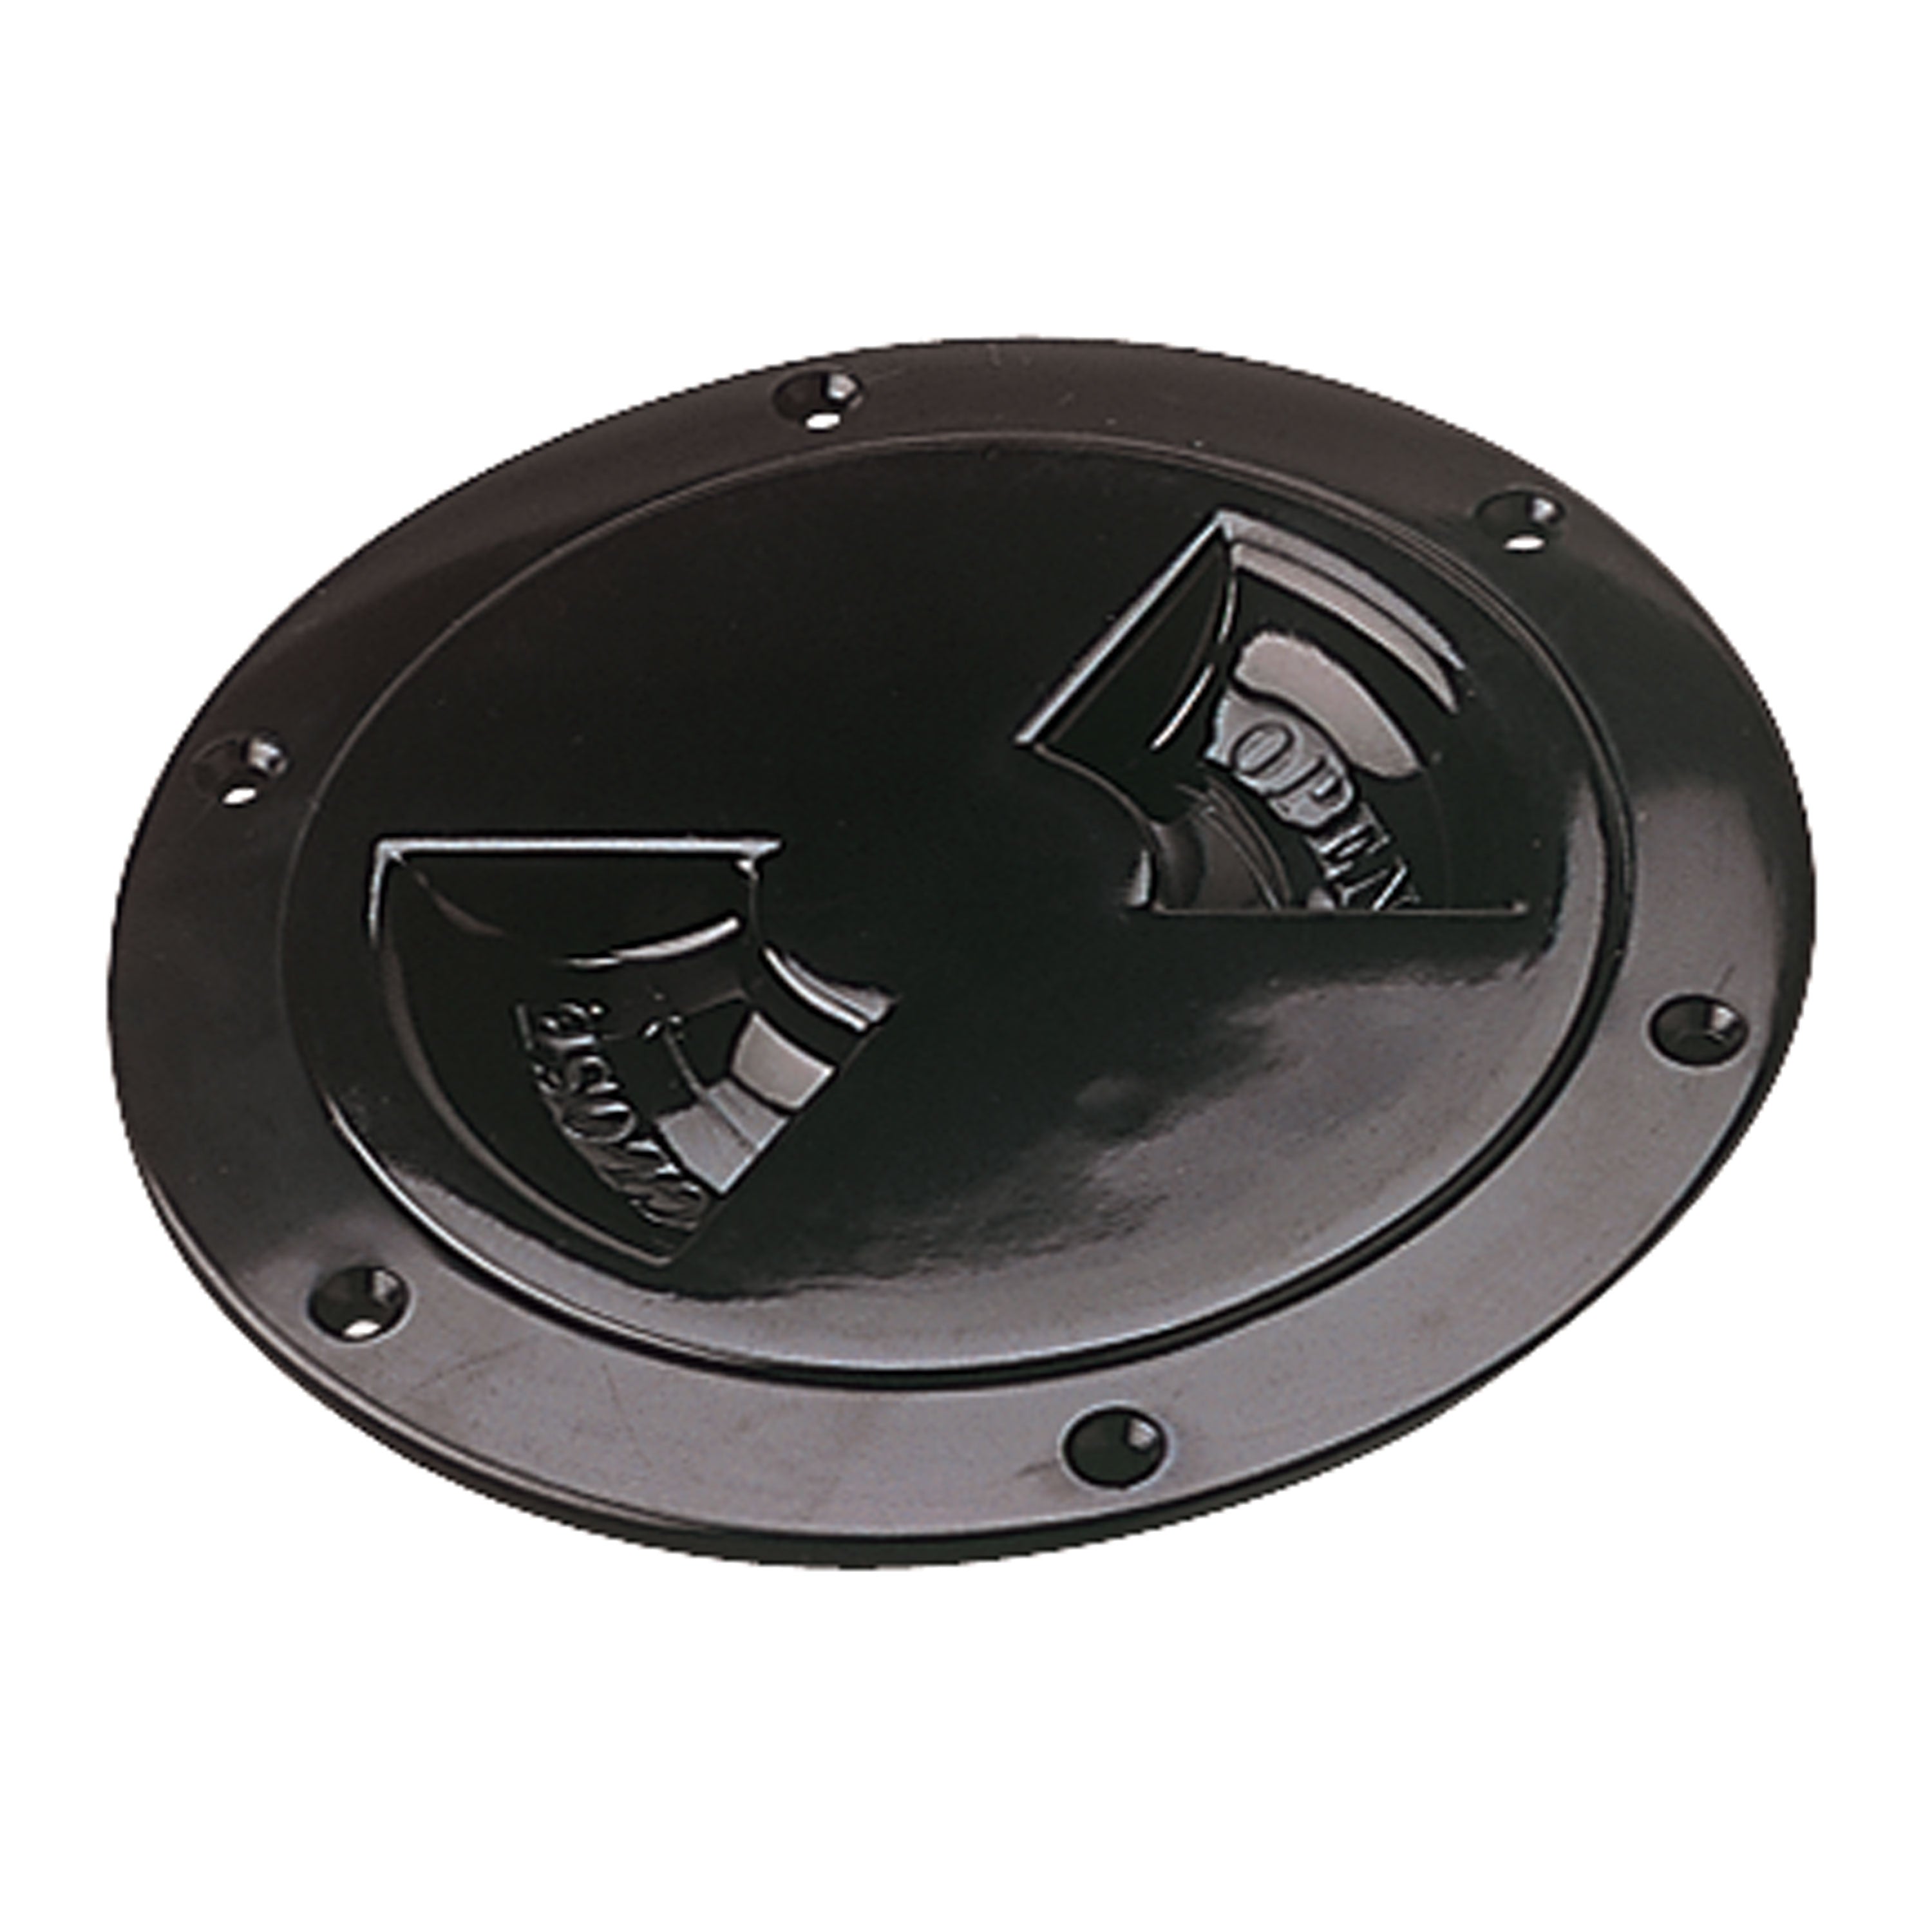 Sea-Dog 337145-1 Screw Out Deck Plate- 4-7/16", Black